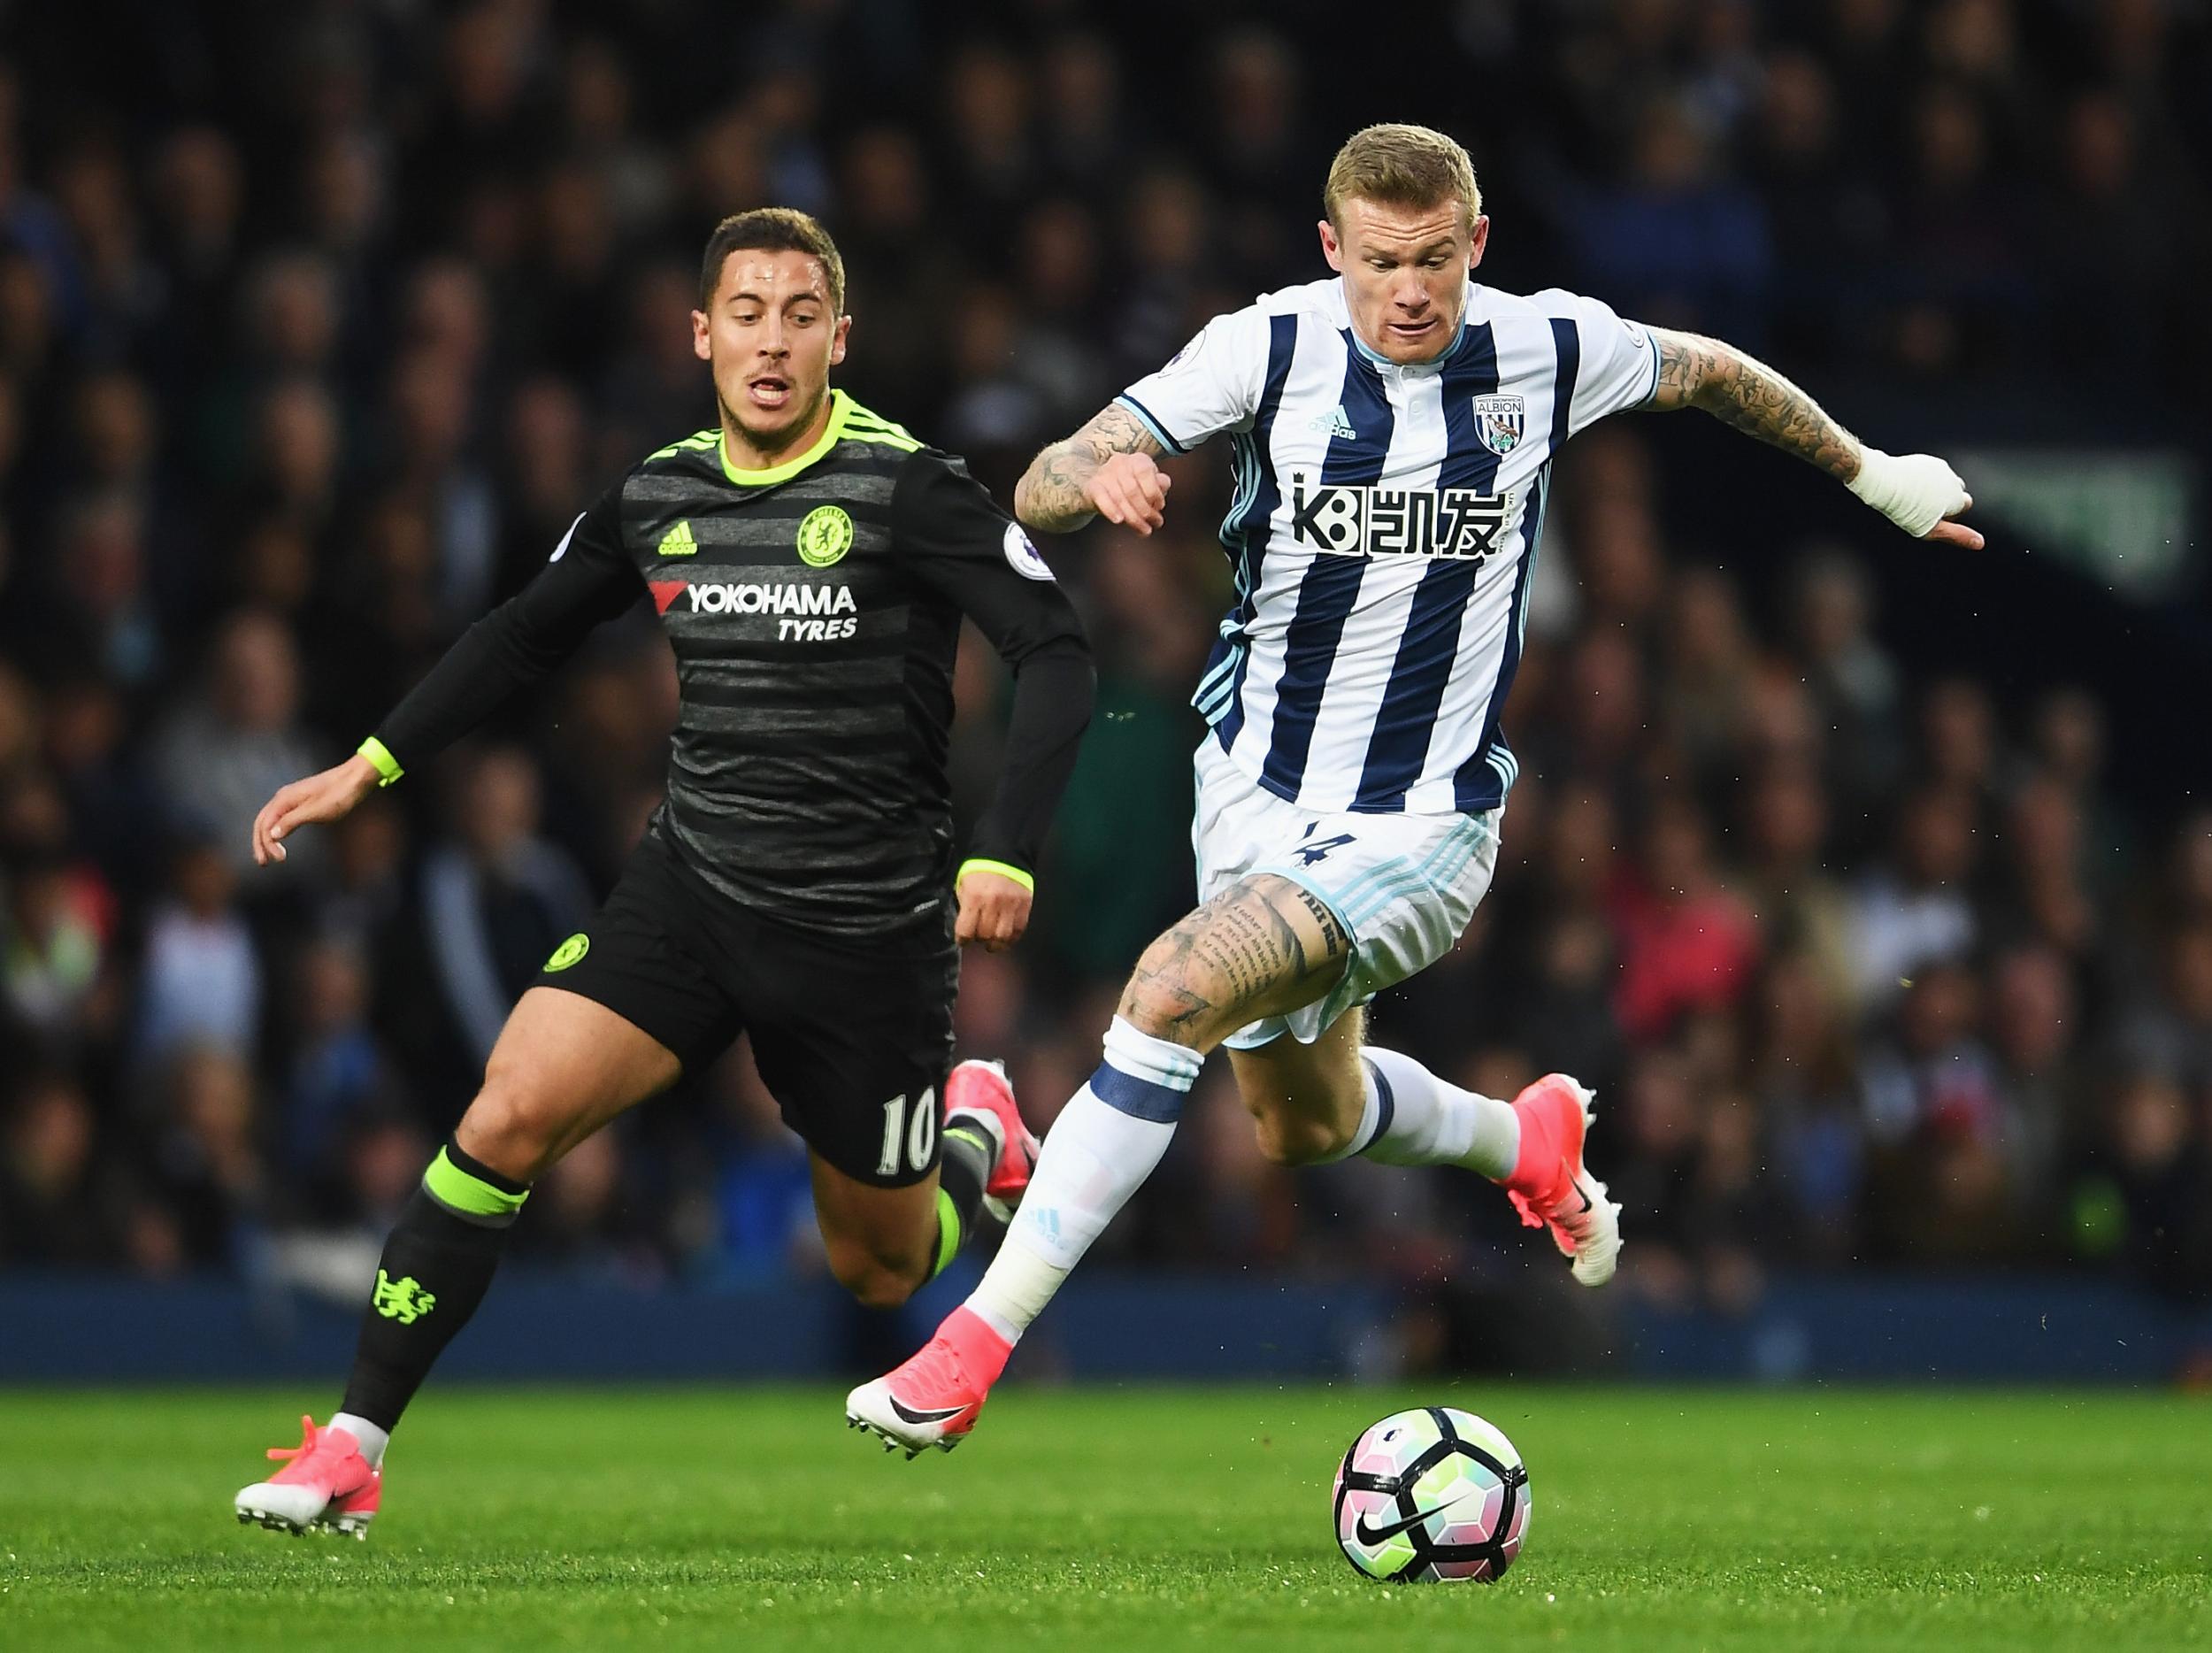 &#13;
McClean will return to Baggies duty on Monday evening &#13;